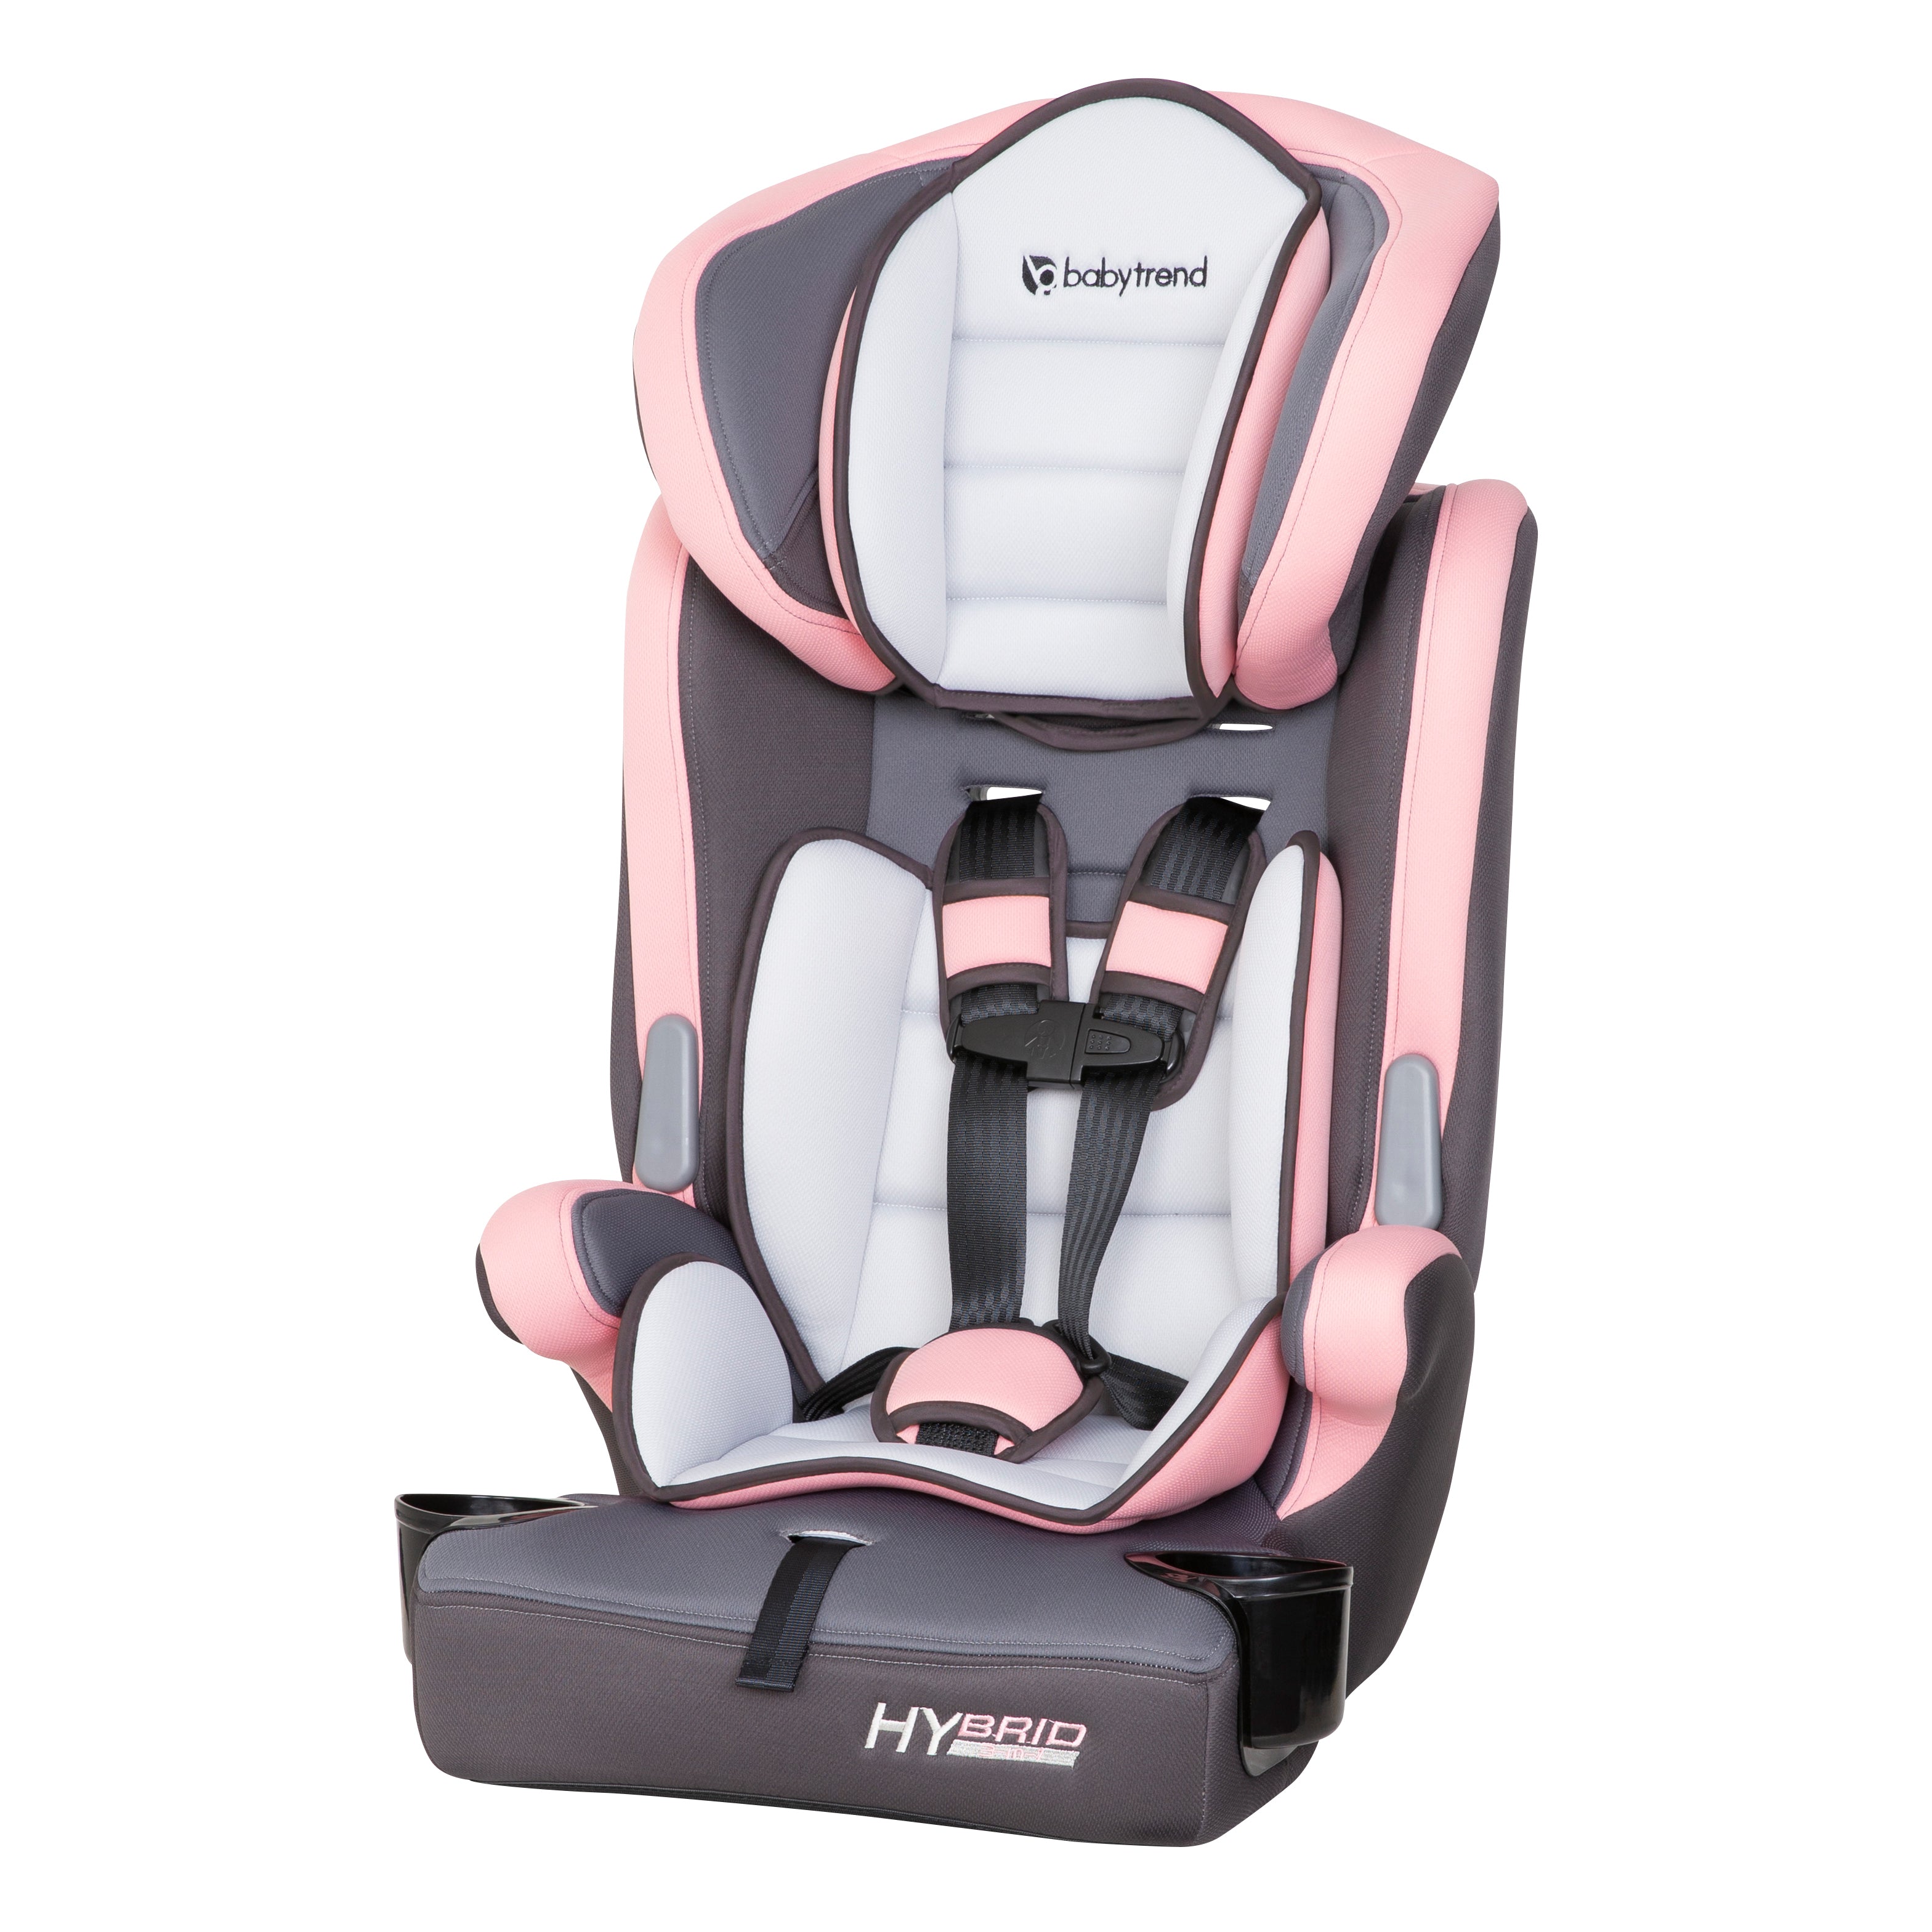 Review: Safety 1st Grow and Go 3-in-1 Car Seat - Today's Parent